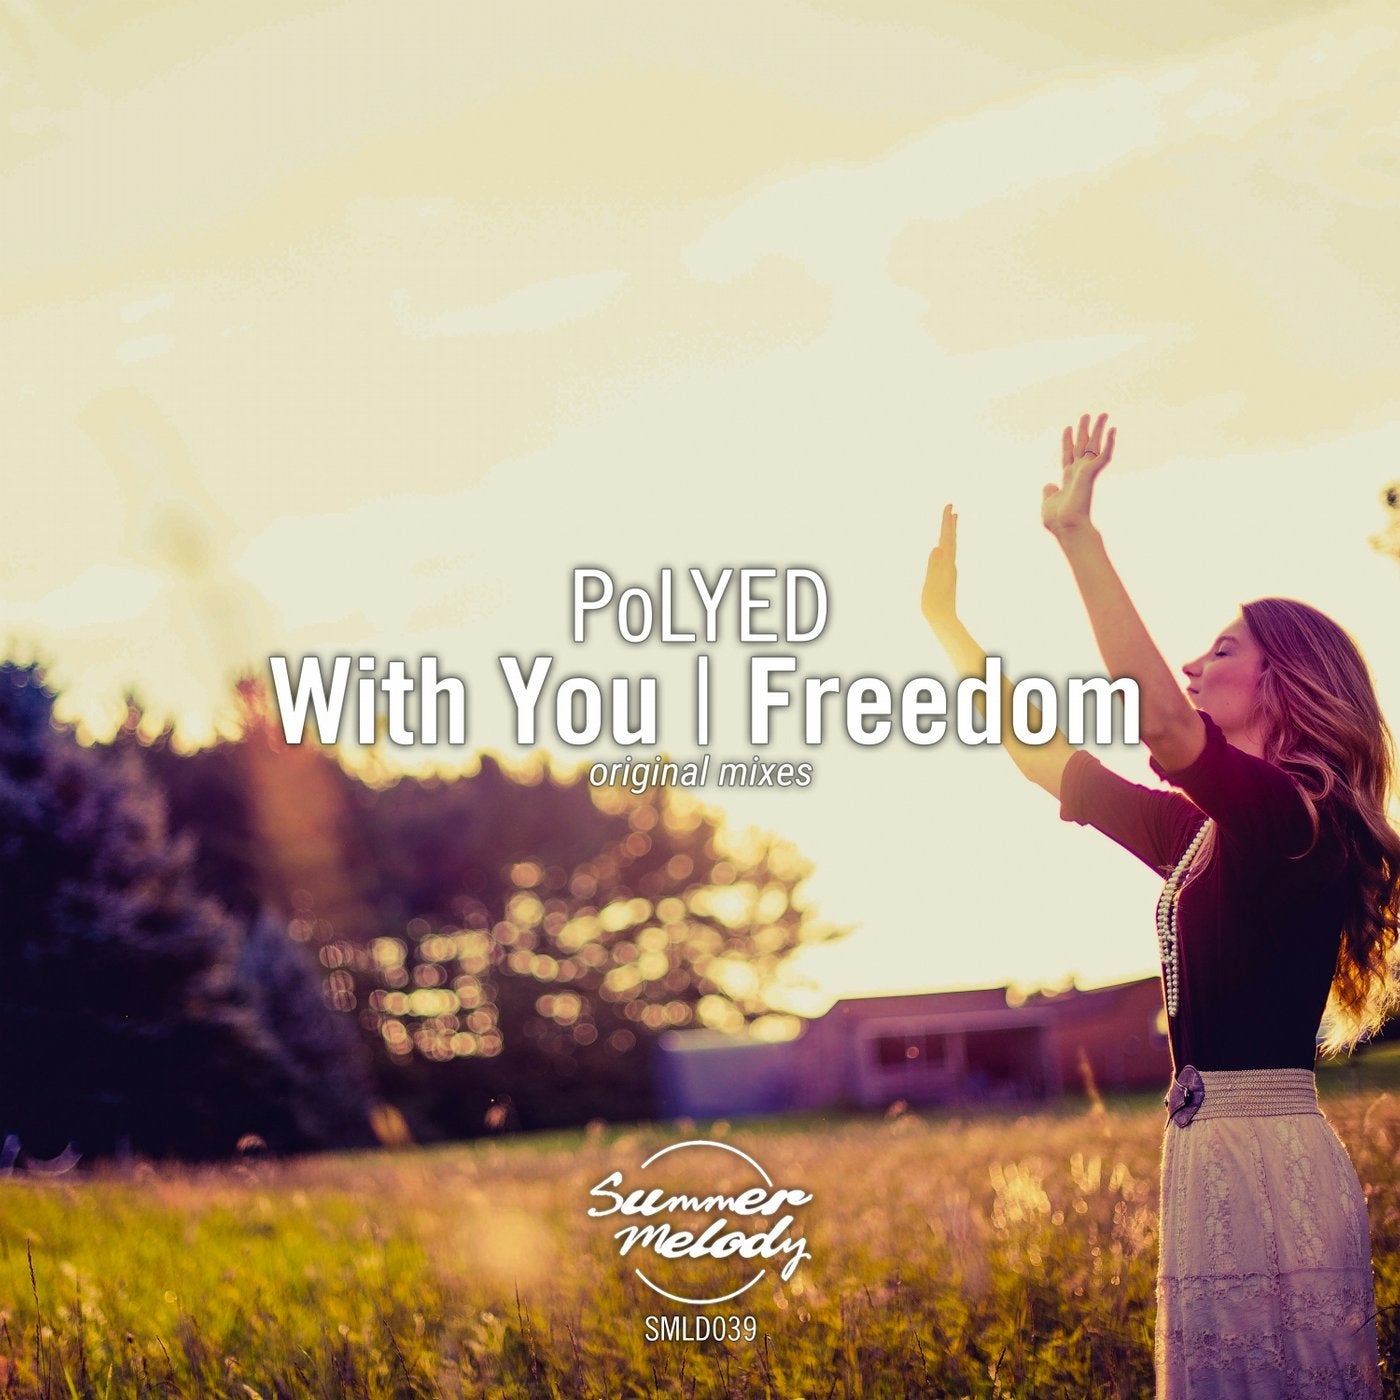 With You / Freedom